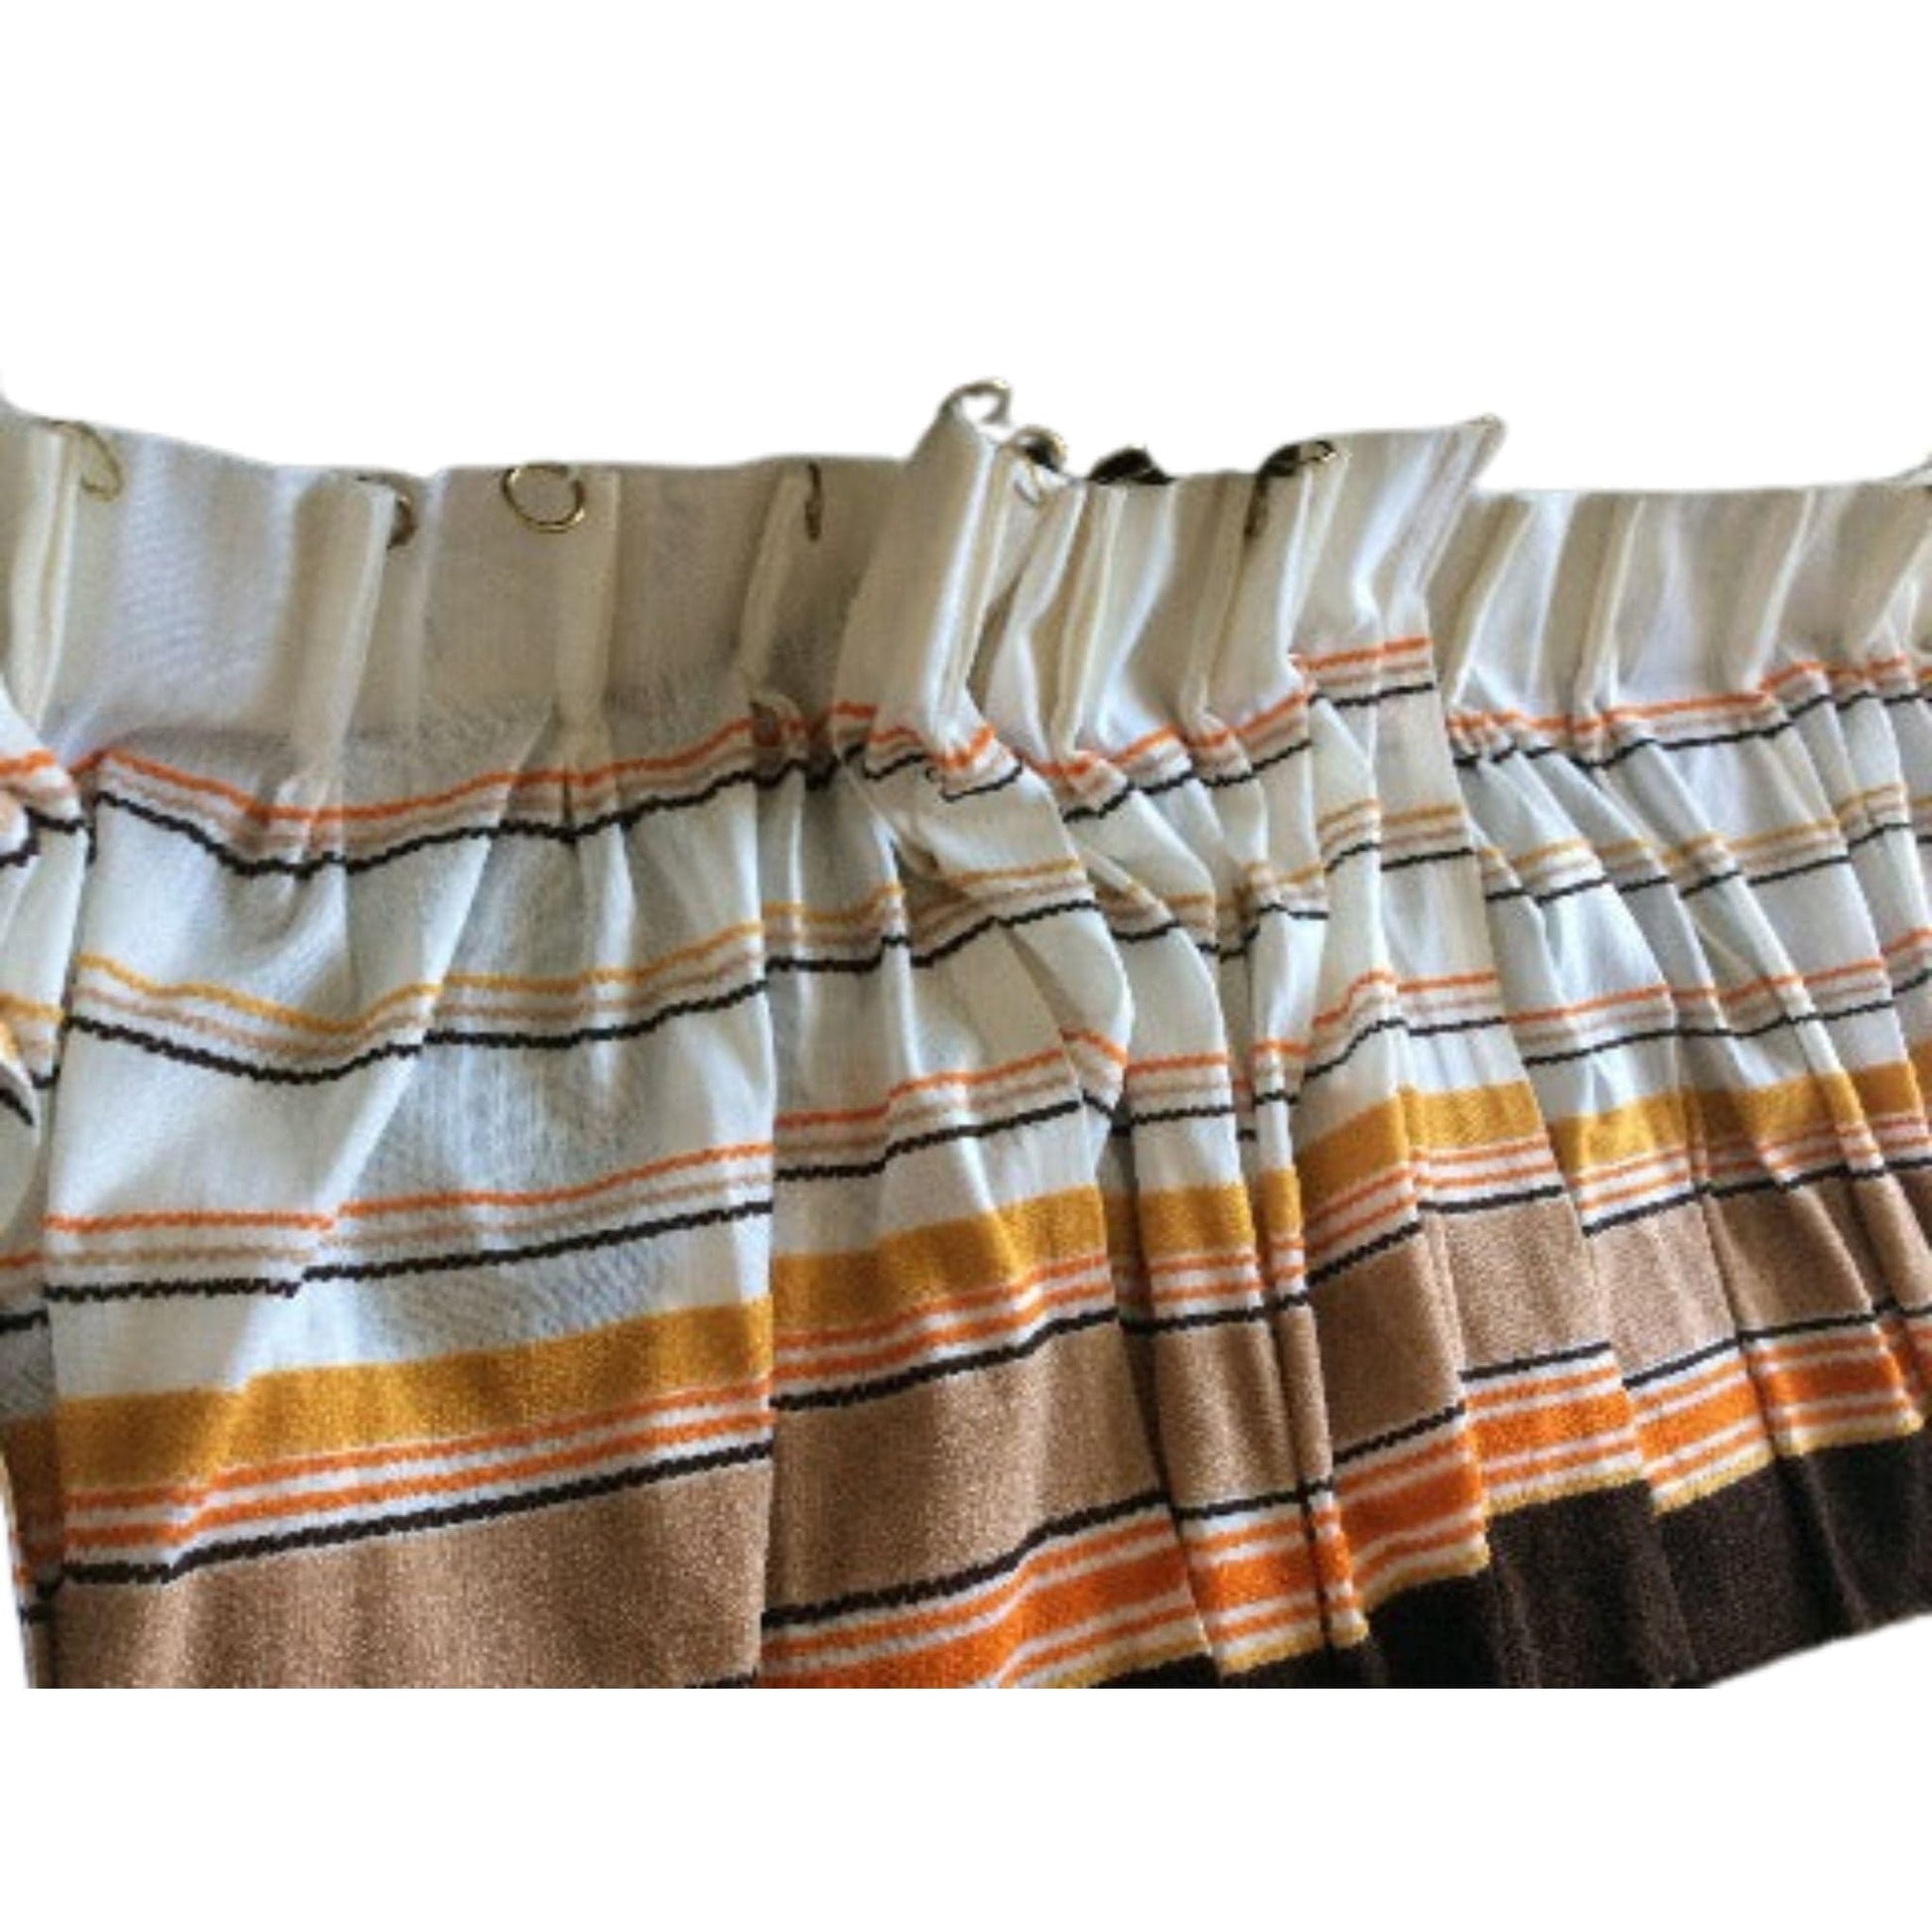 Vintage Cafe Curtains Multi / Synthetic / Vintage 1950s